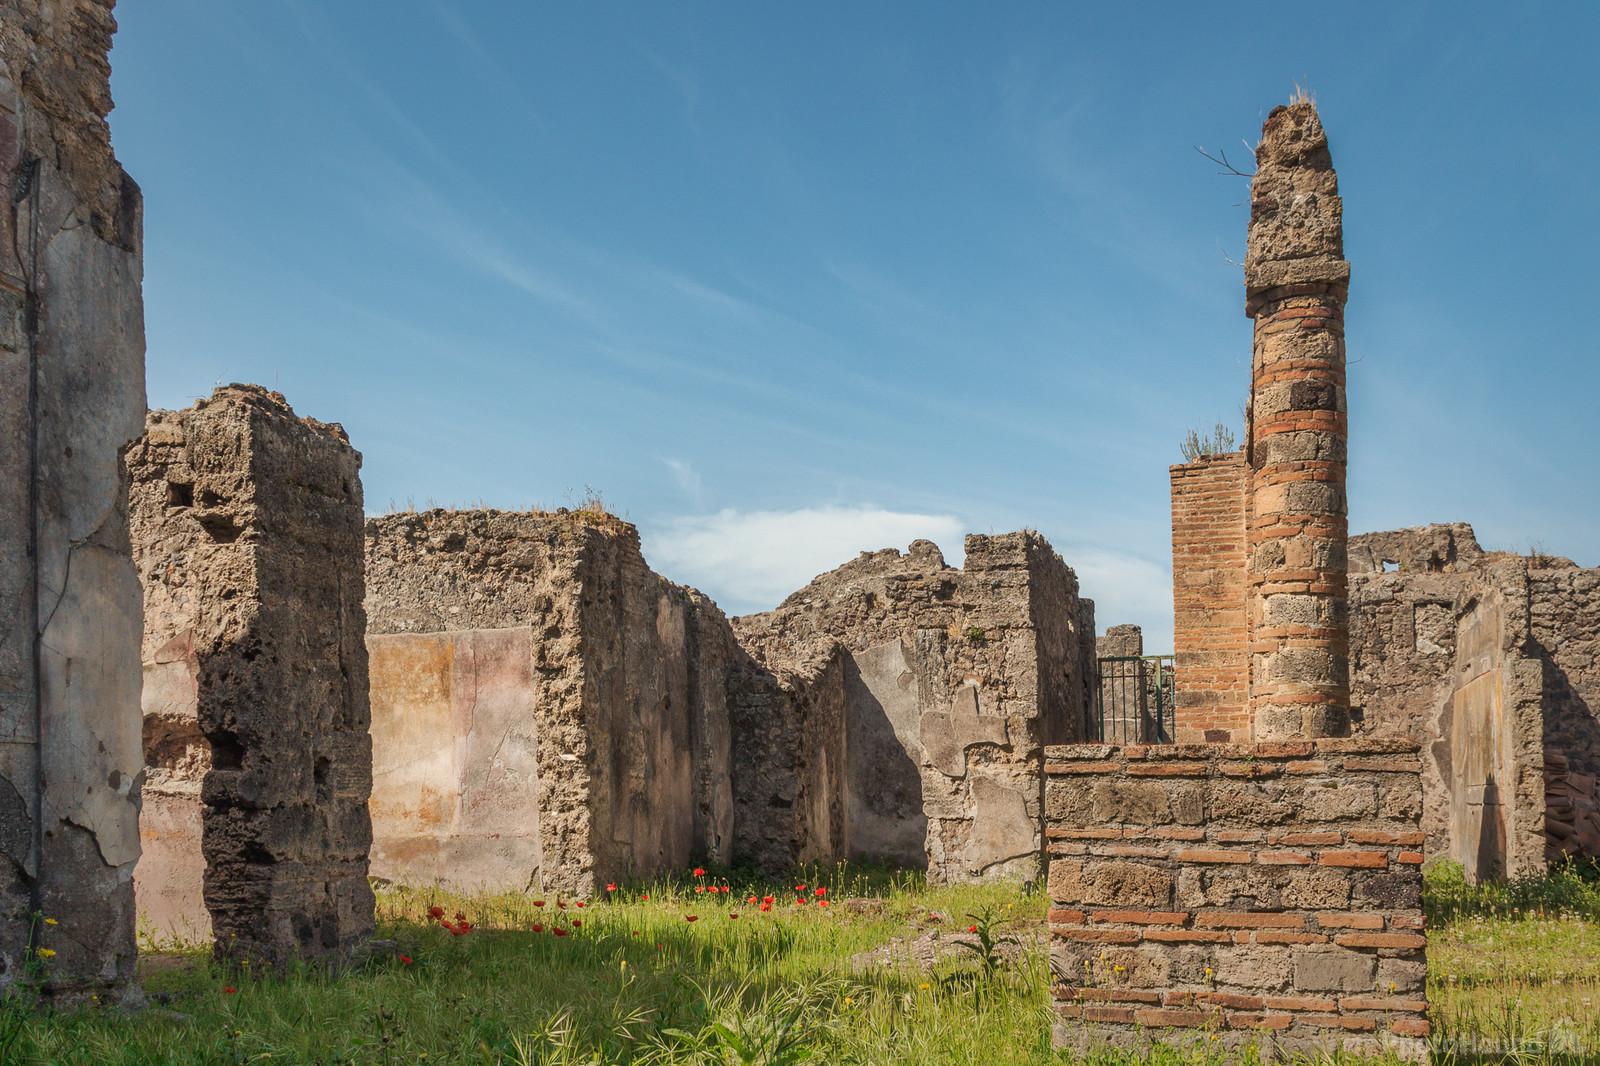 Image of Pompeii by Mathew Browne